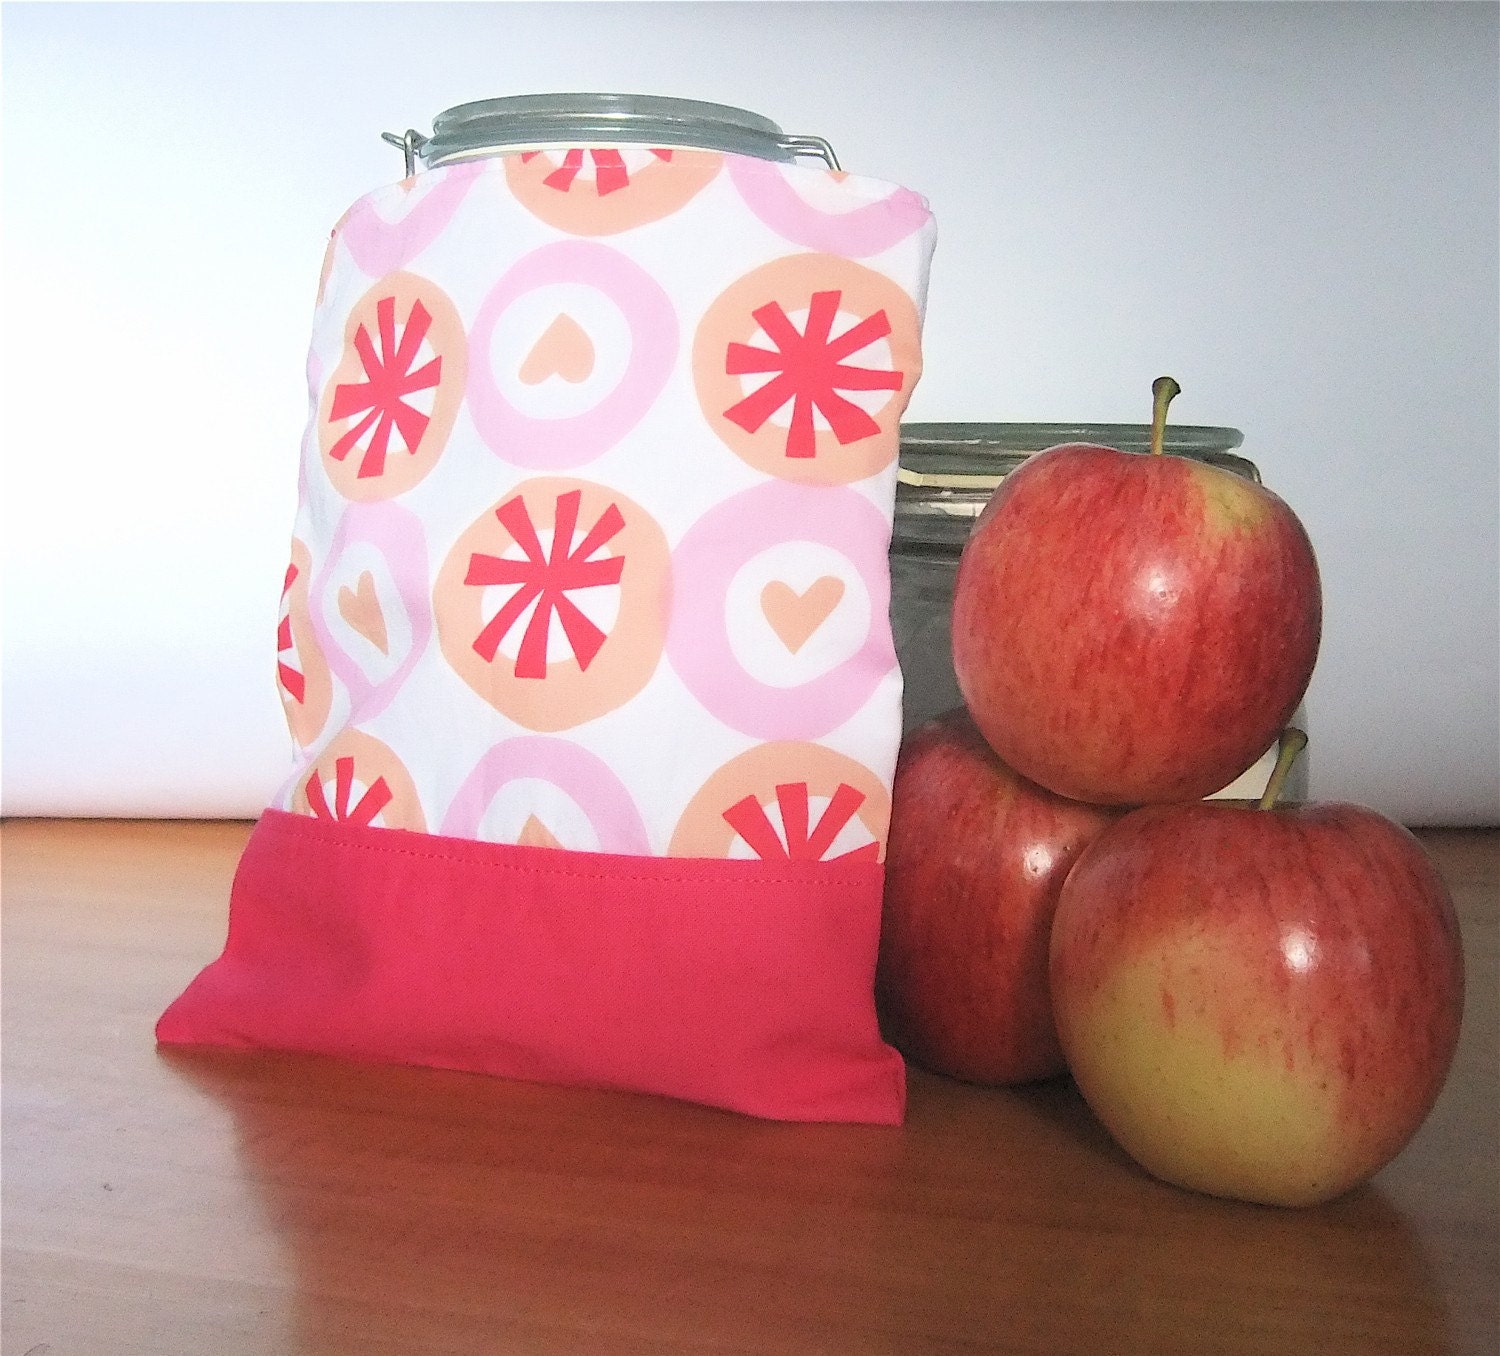 Reusable  Snack Bag Sandwich Cloth - Summer Love Hearts eco friendly by BonTonsGifts on Etsy